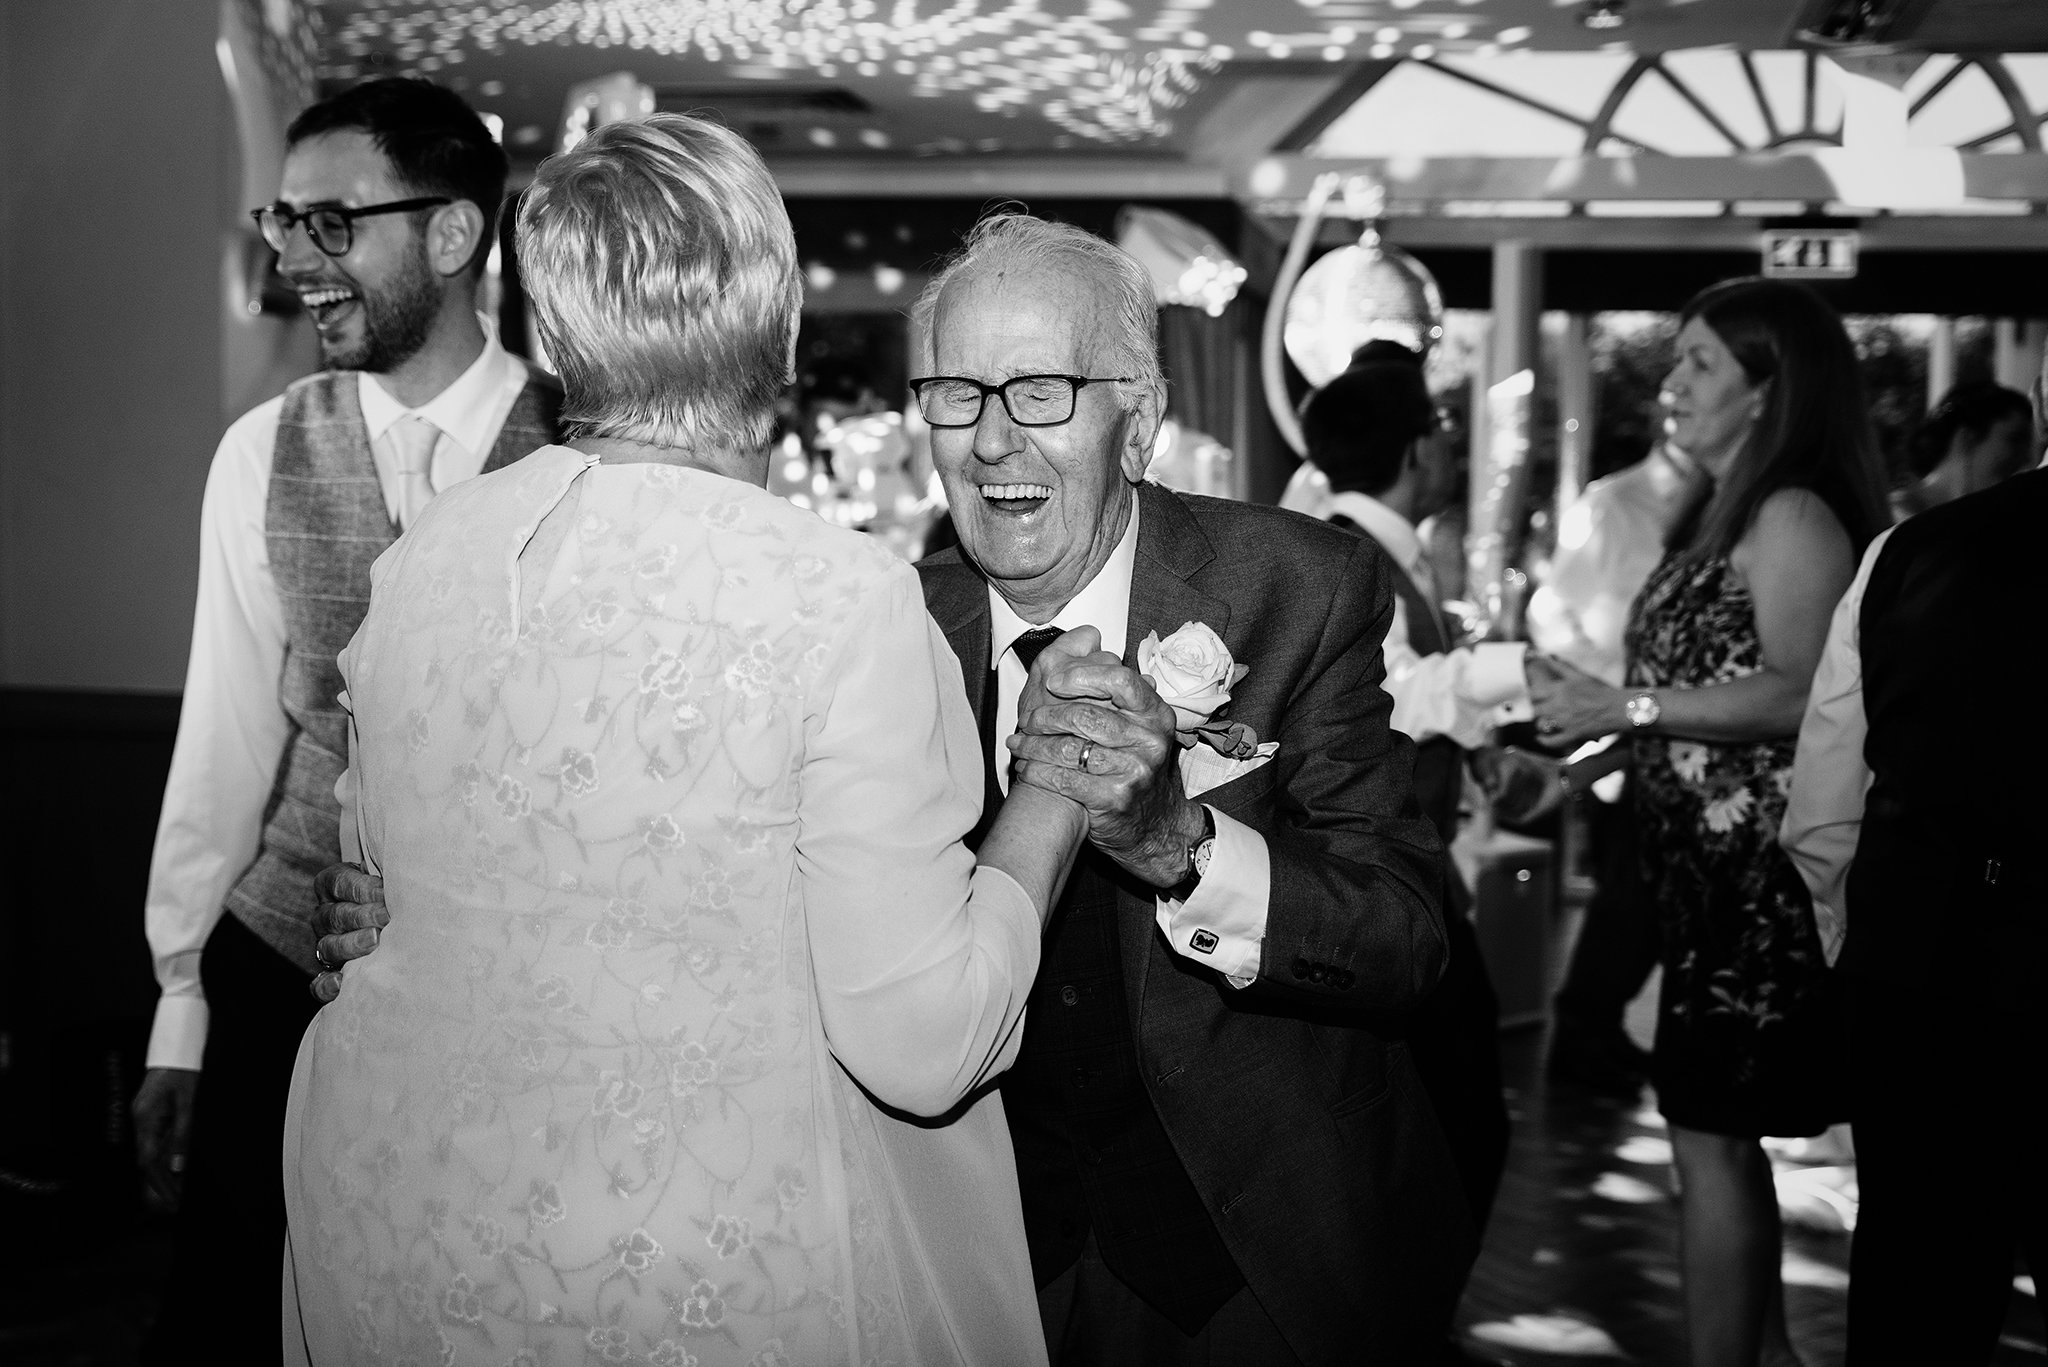  A black and white photo of the groom’s grandfather dancing at a wedding reception 